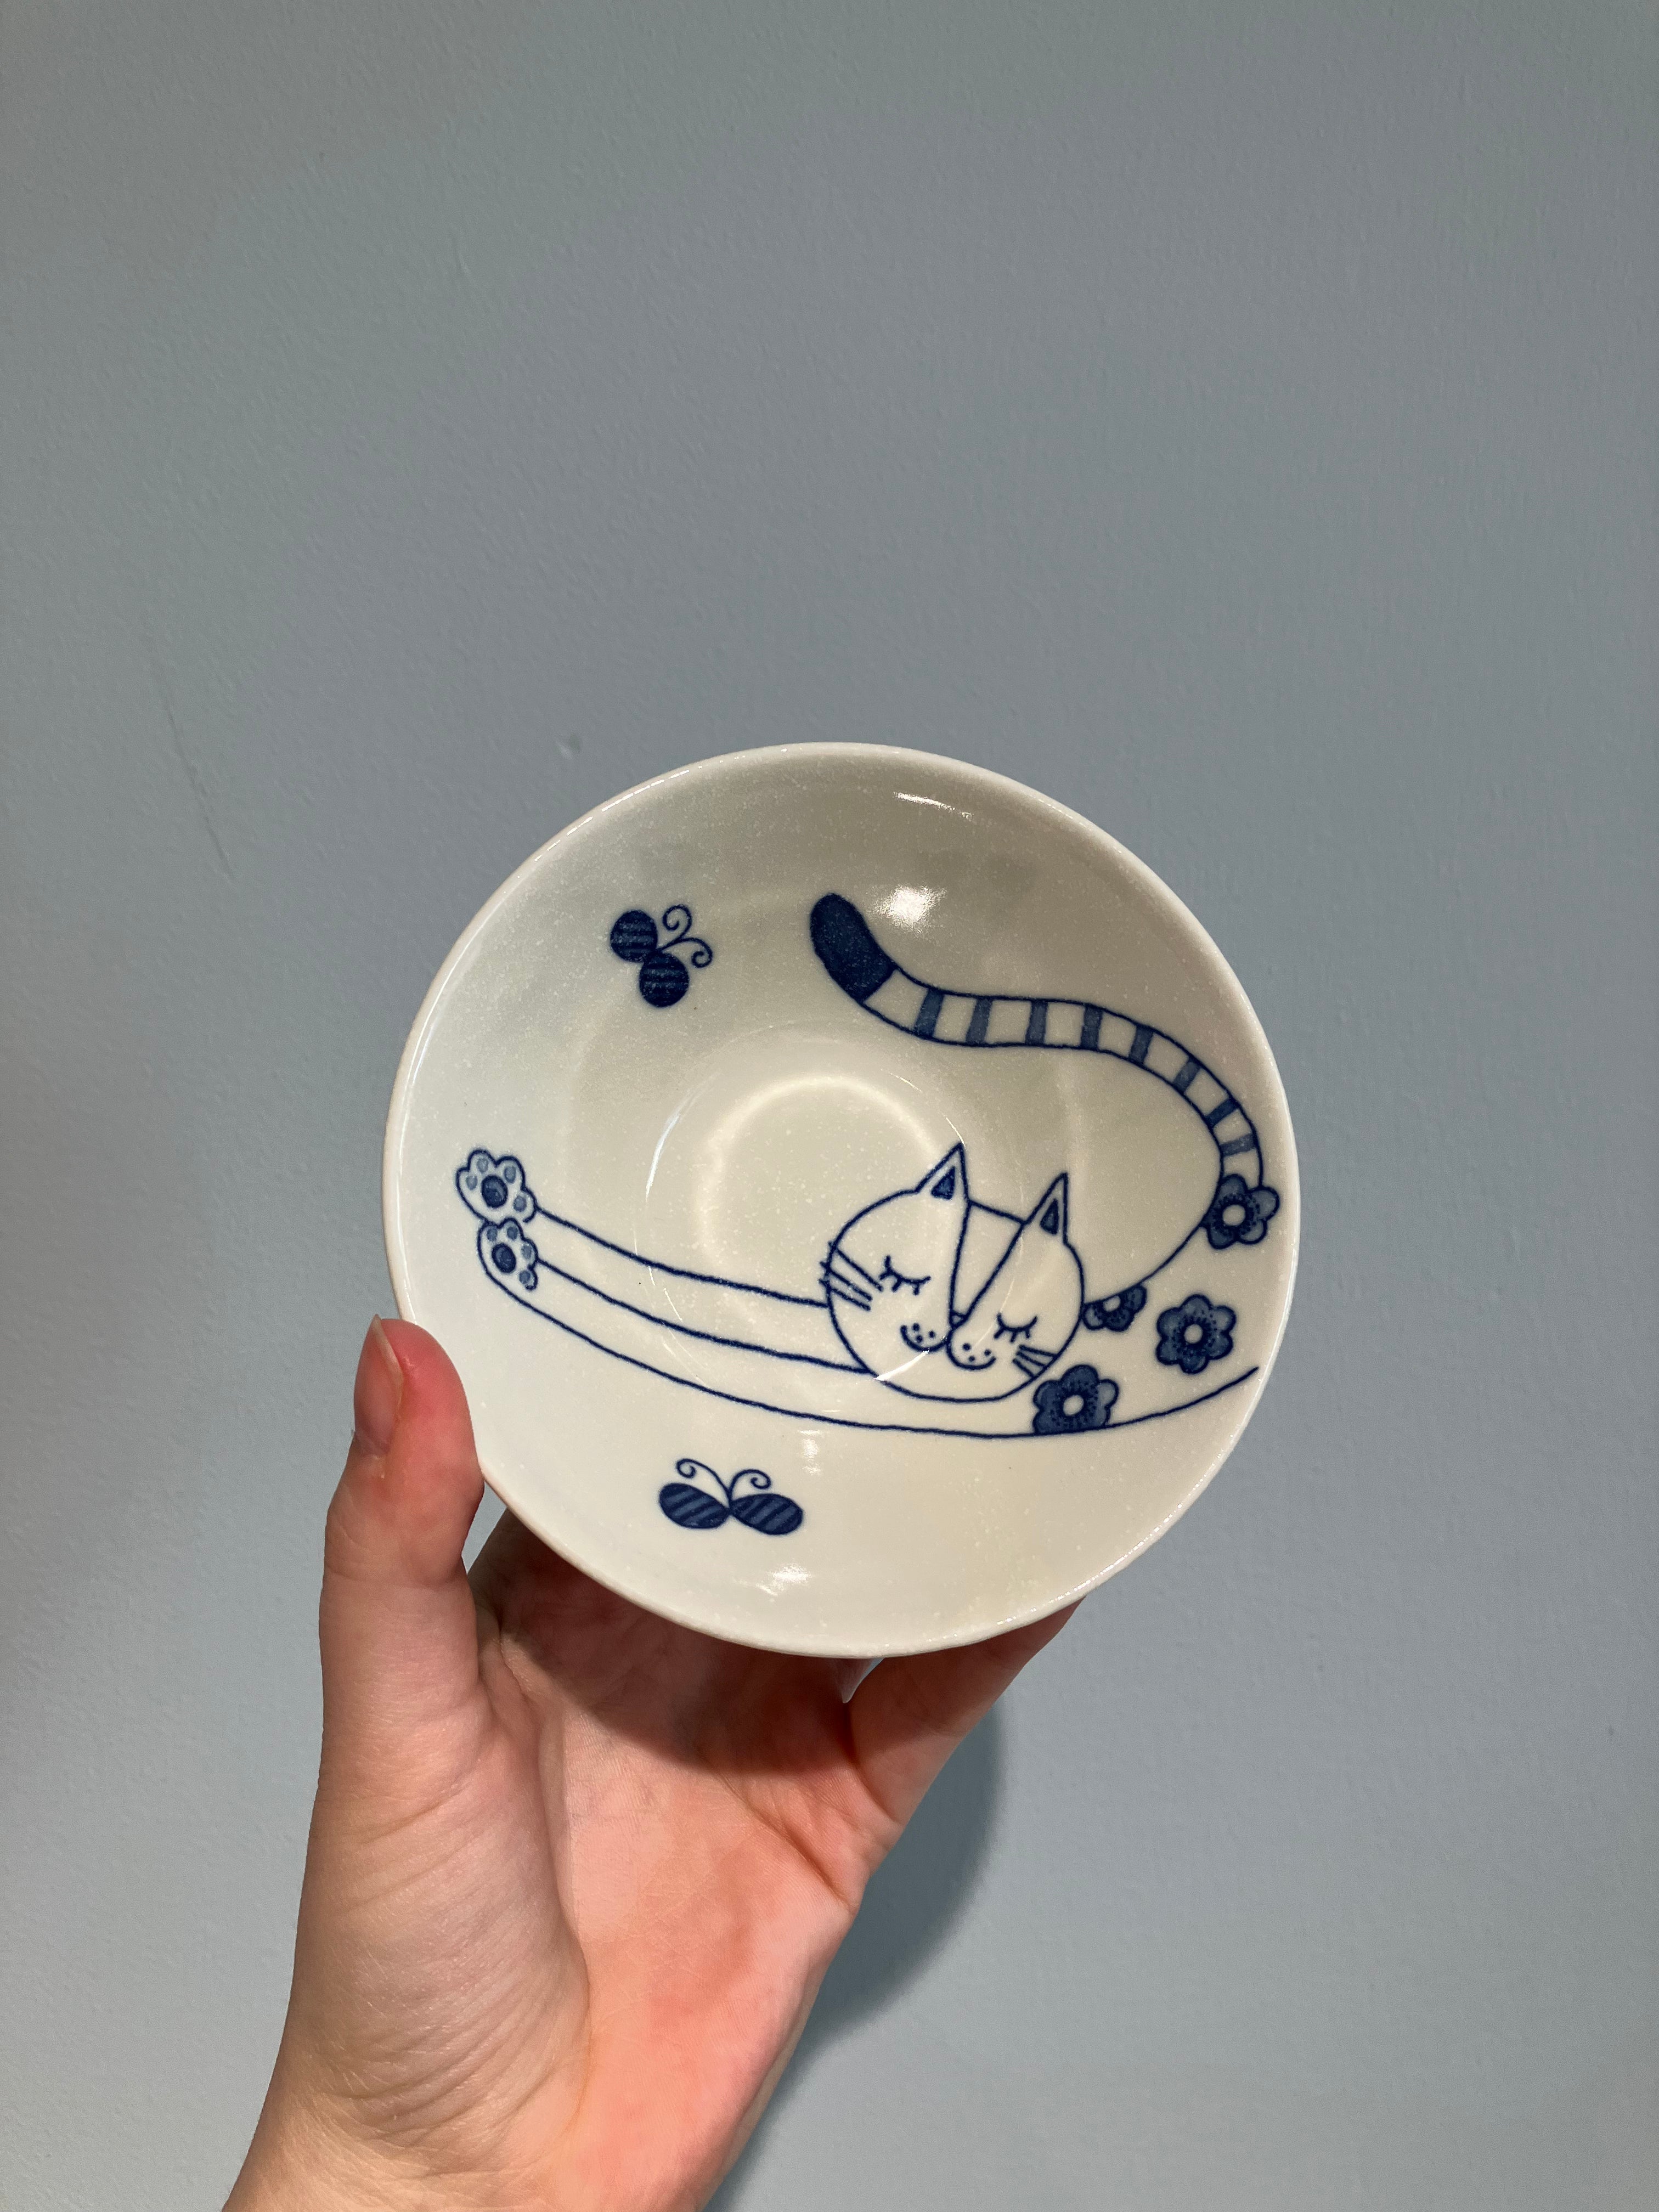 Small white bowl with blue cat stretching